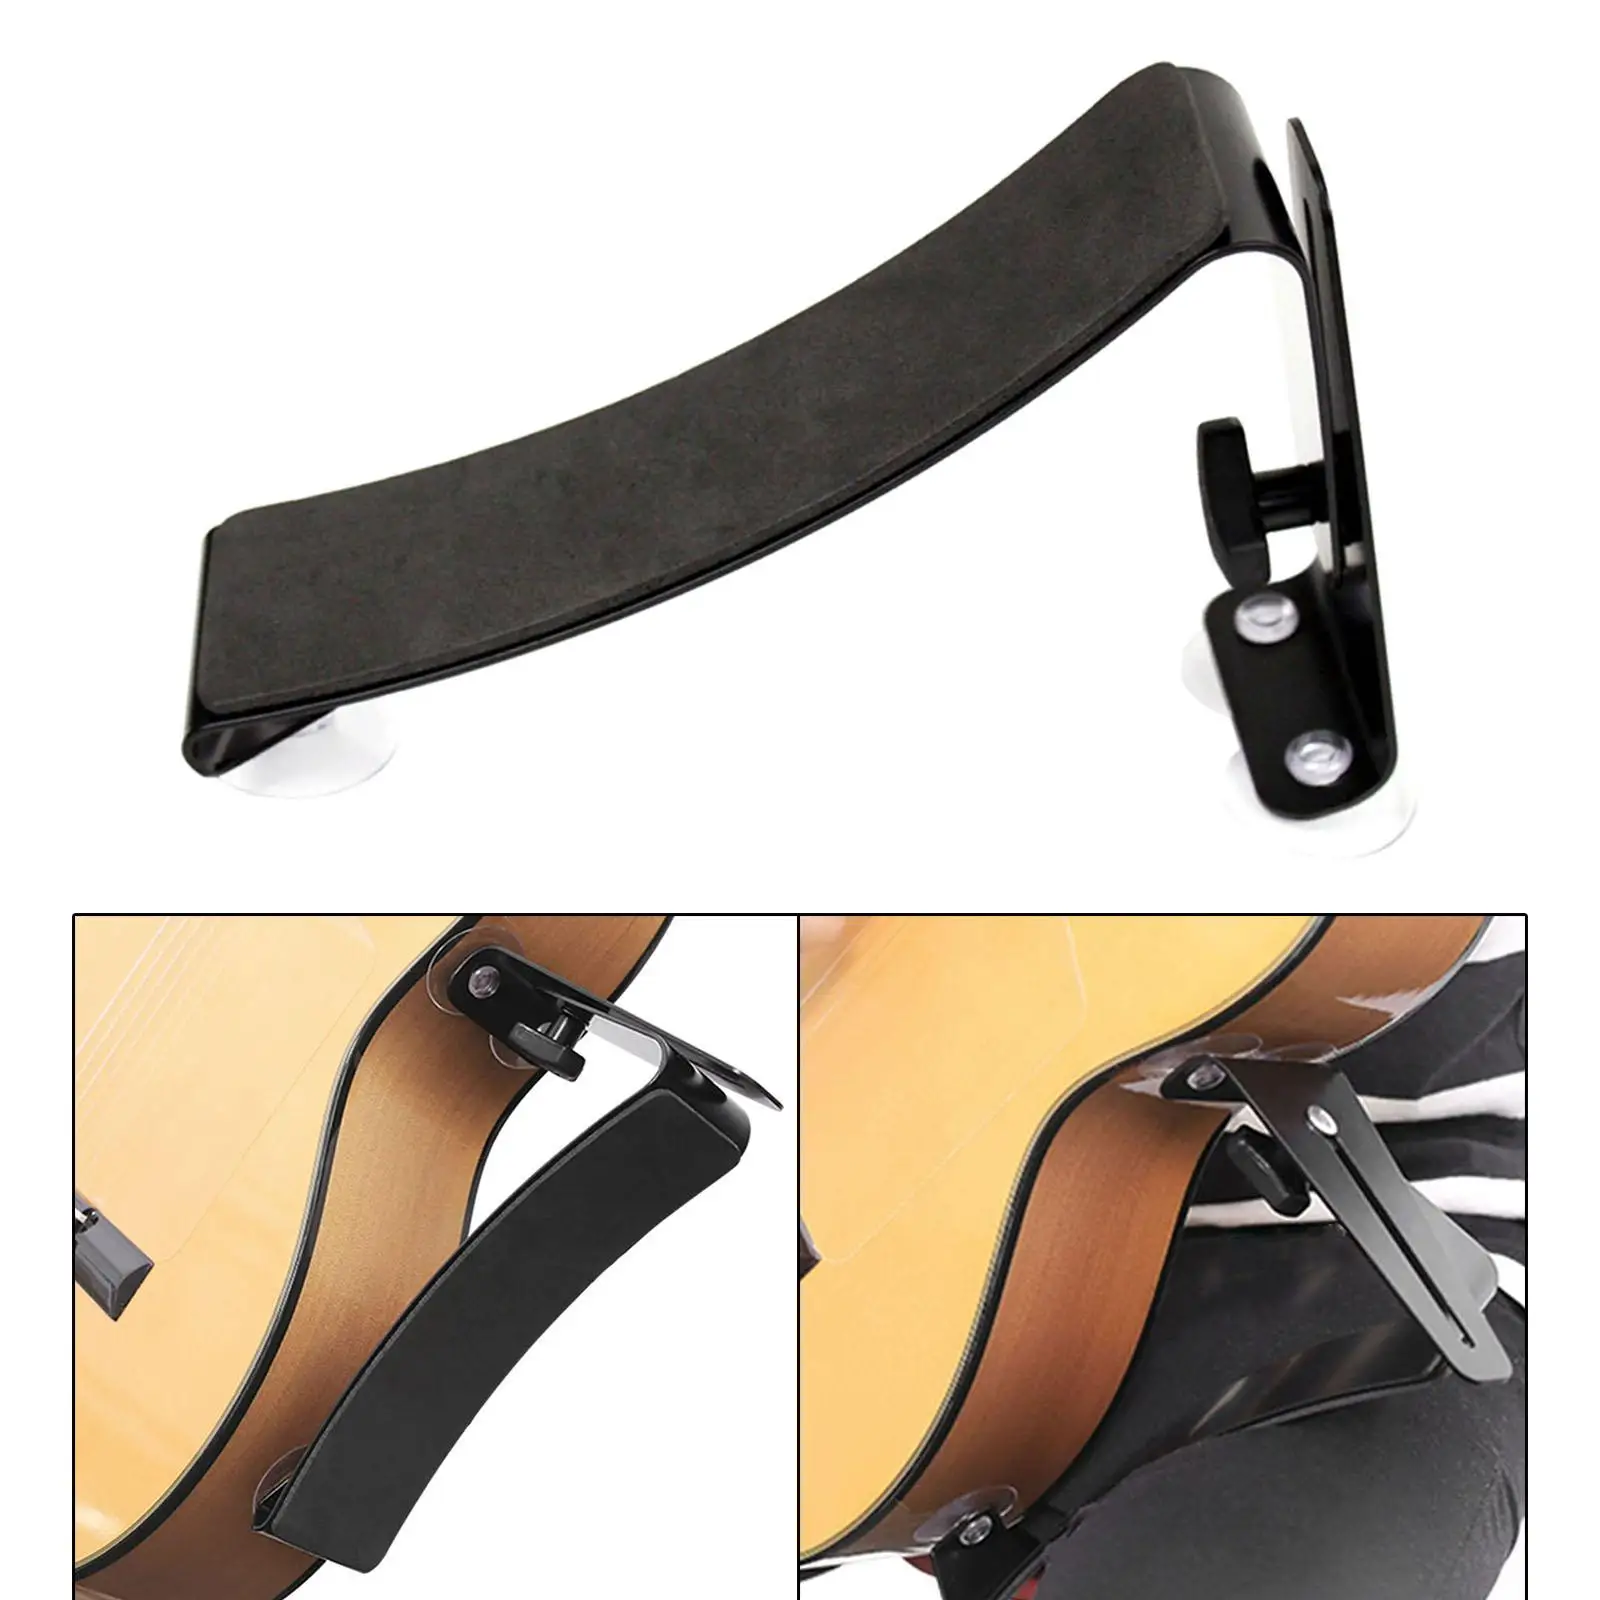 Professional Guitar Support,Guitar Cushion,Guitar Foot Stool,Guitar Neck Rest Support Cradle for Playing Guitar Prop